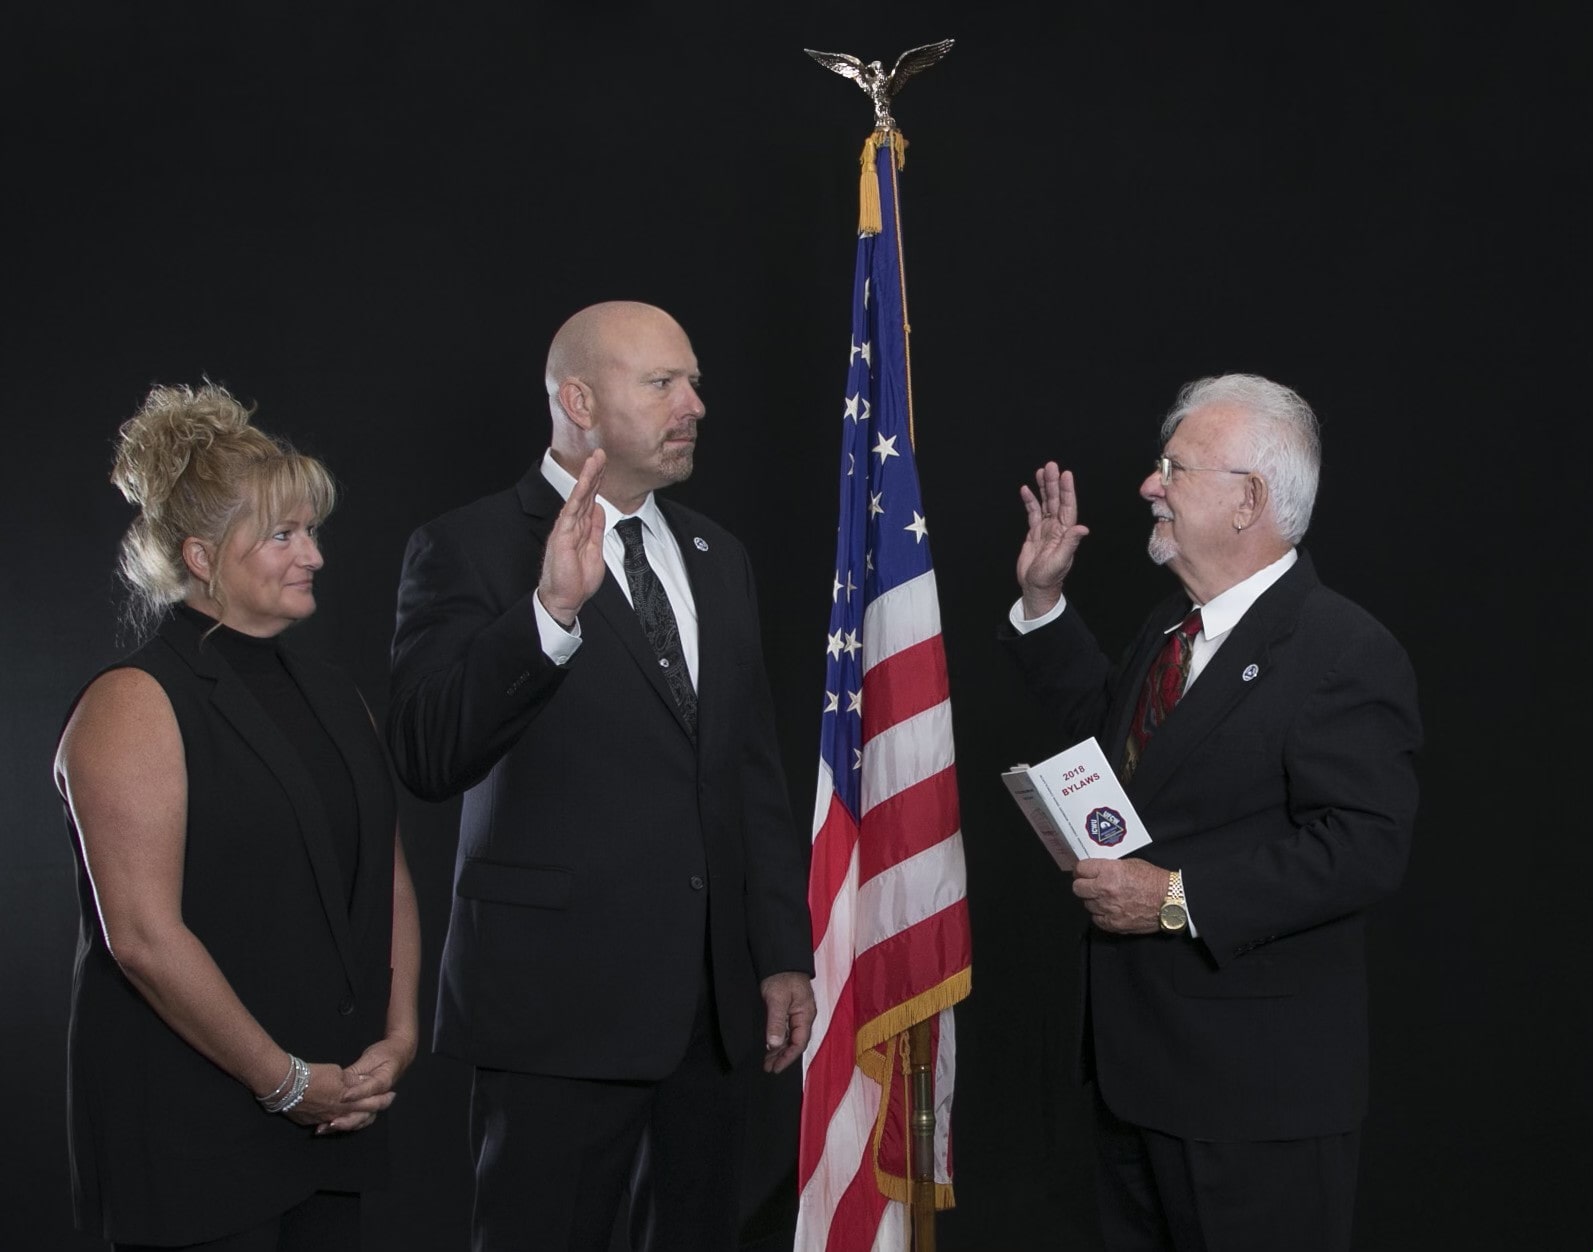 Recorder Chuck Denny swearing in new Council President Lance Heasley (with his wife Lisa as witness).